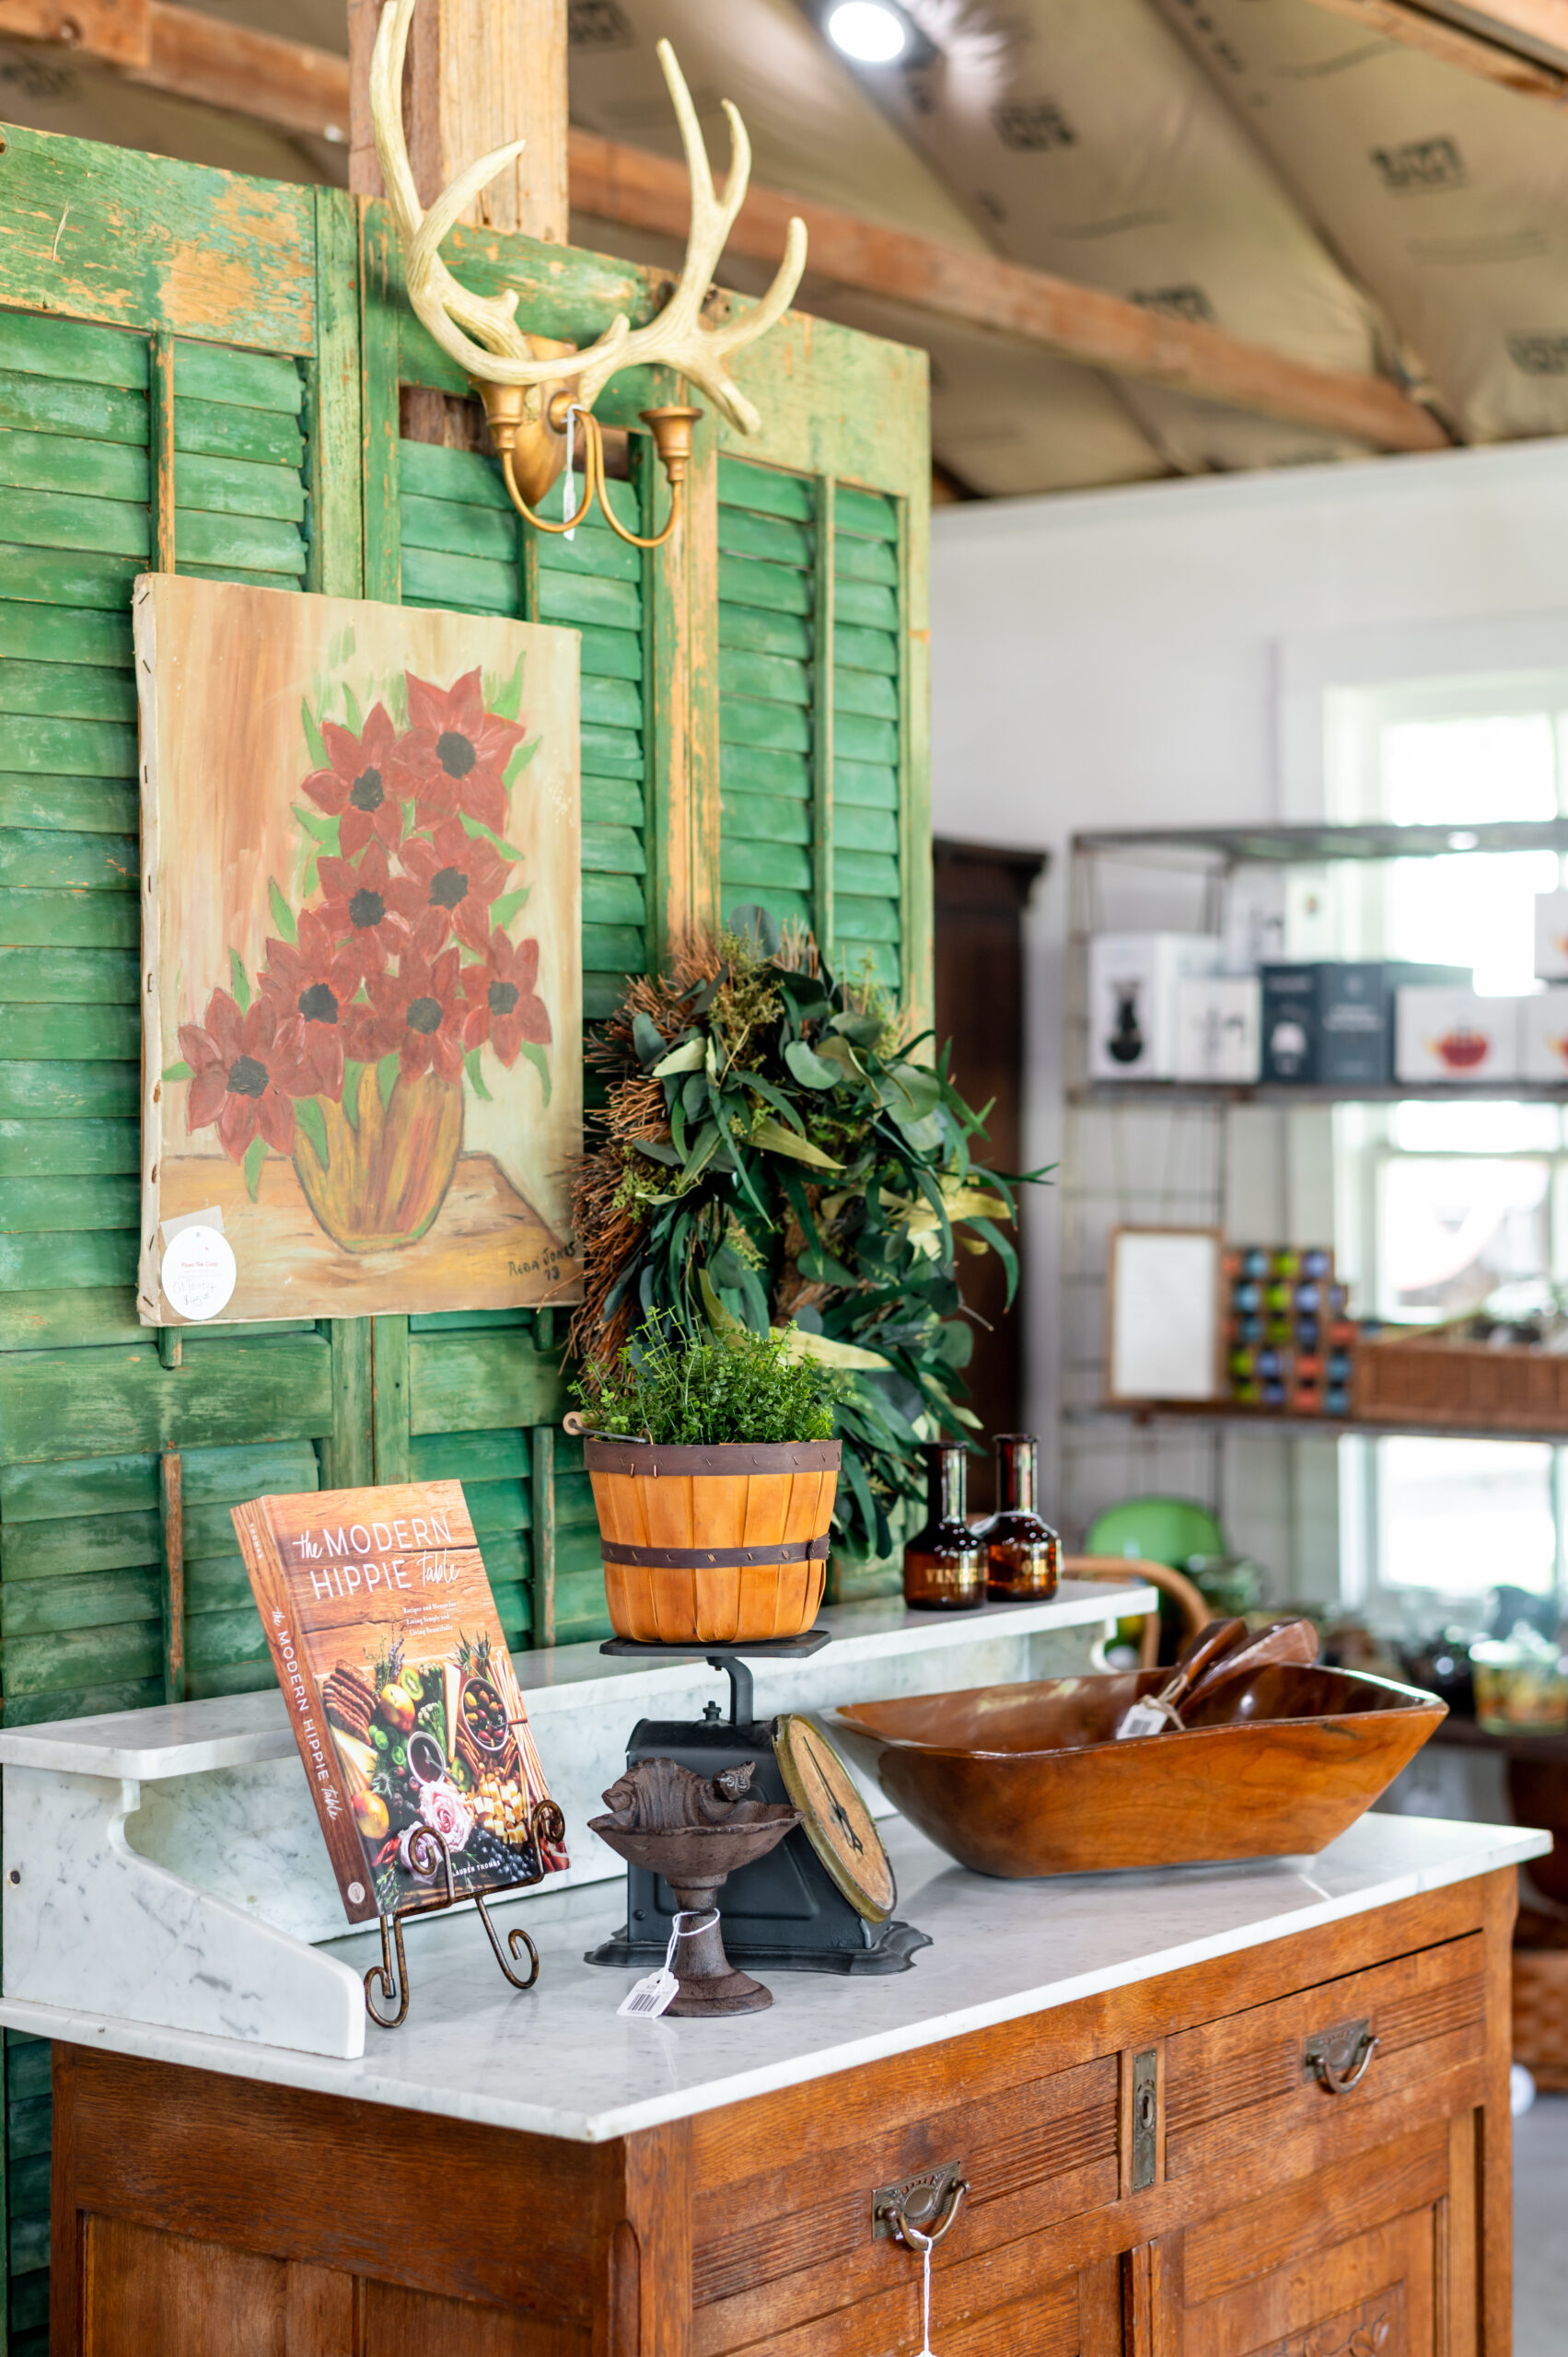 Interior design photography of rustic decor at The Roost & Flown the Coop